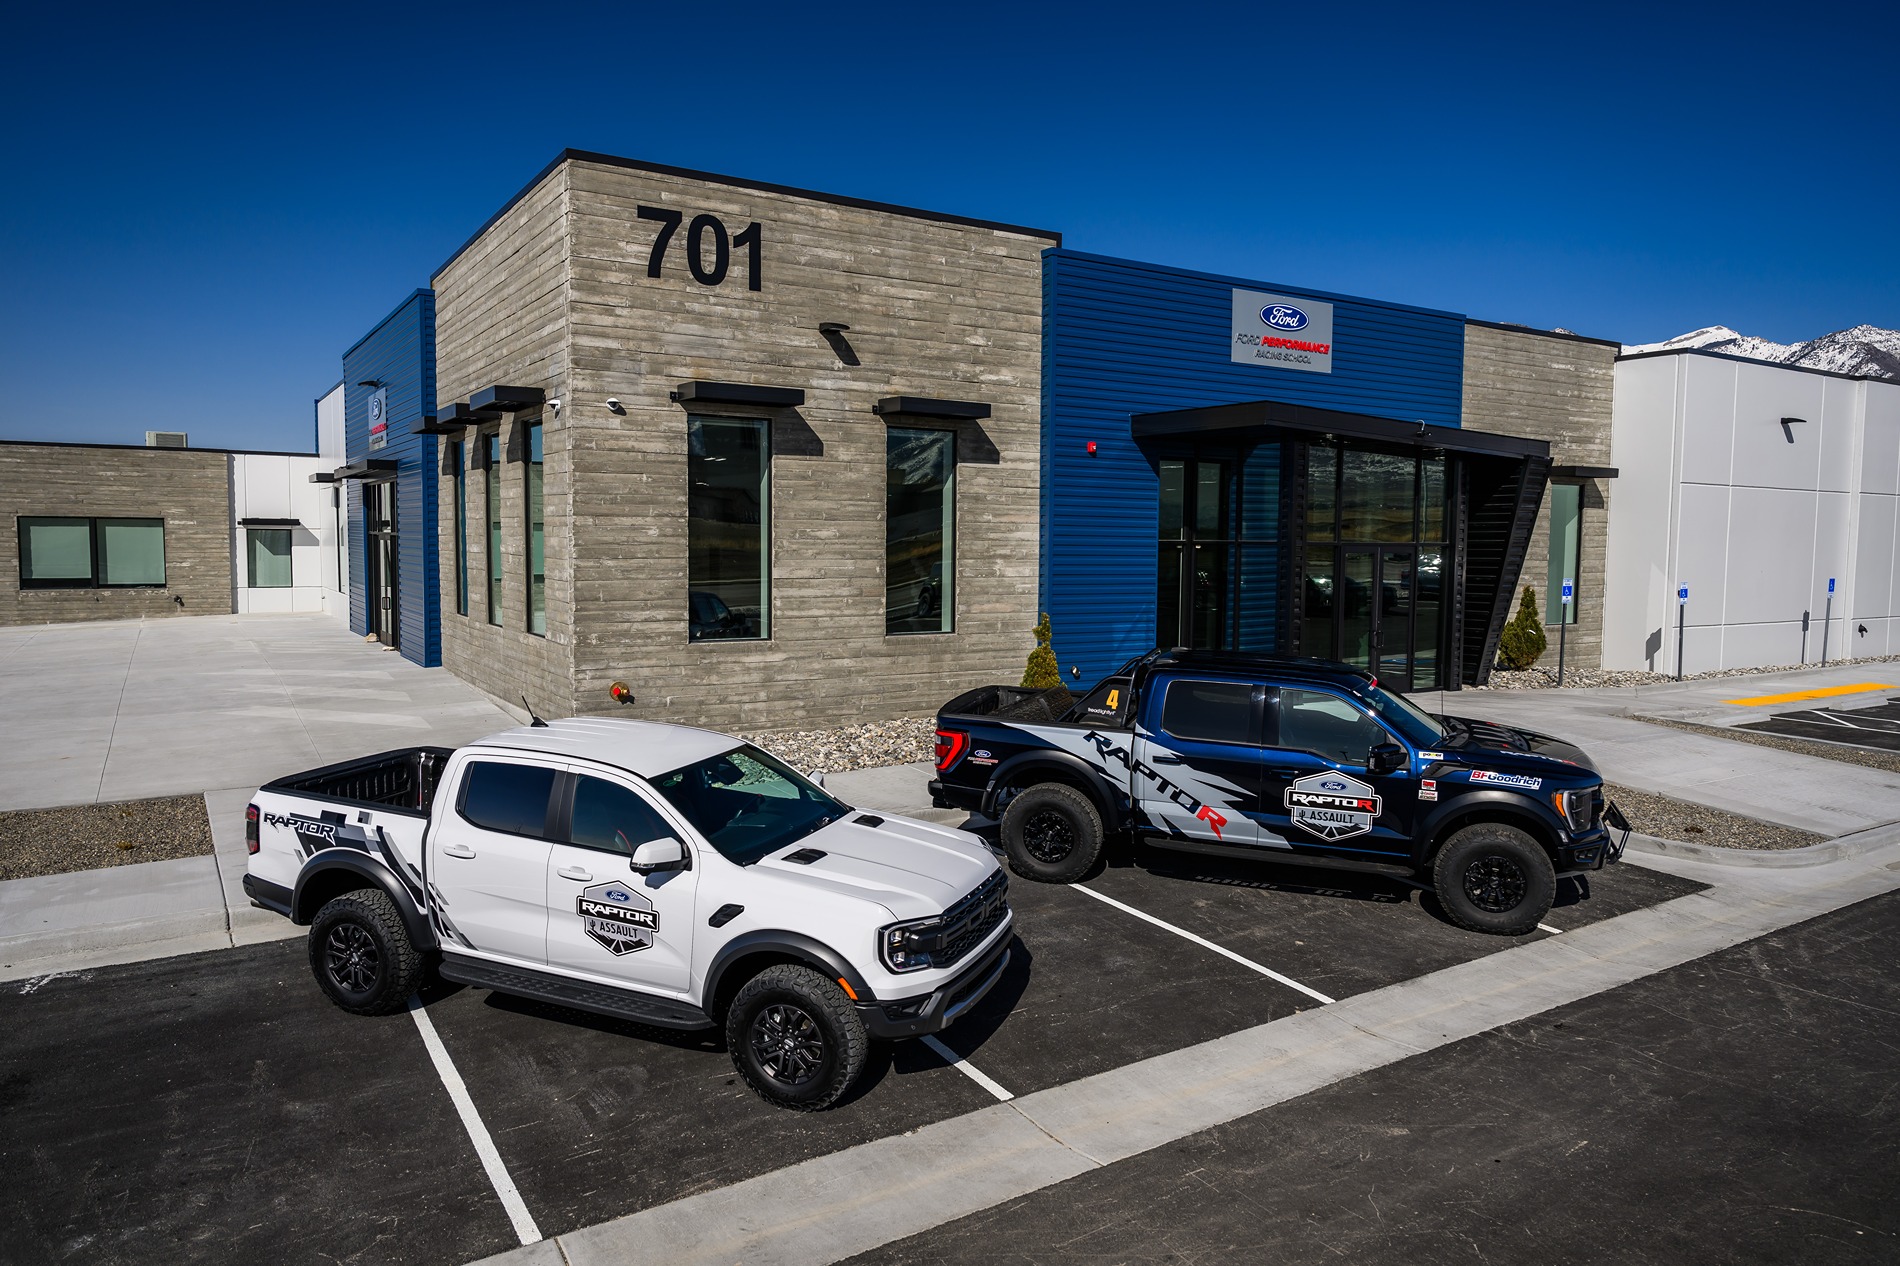 Ford Ranger Ranger Raptor Assault School Announced Exclusively (& Free) for Owners Ford Performance Racing School_Raptor Assault 3